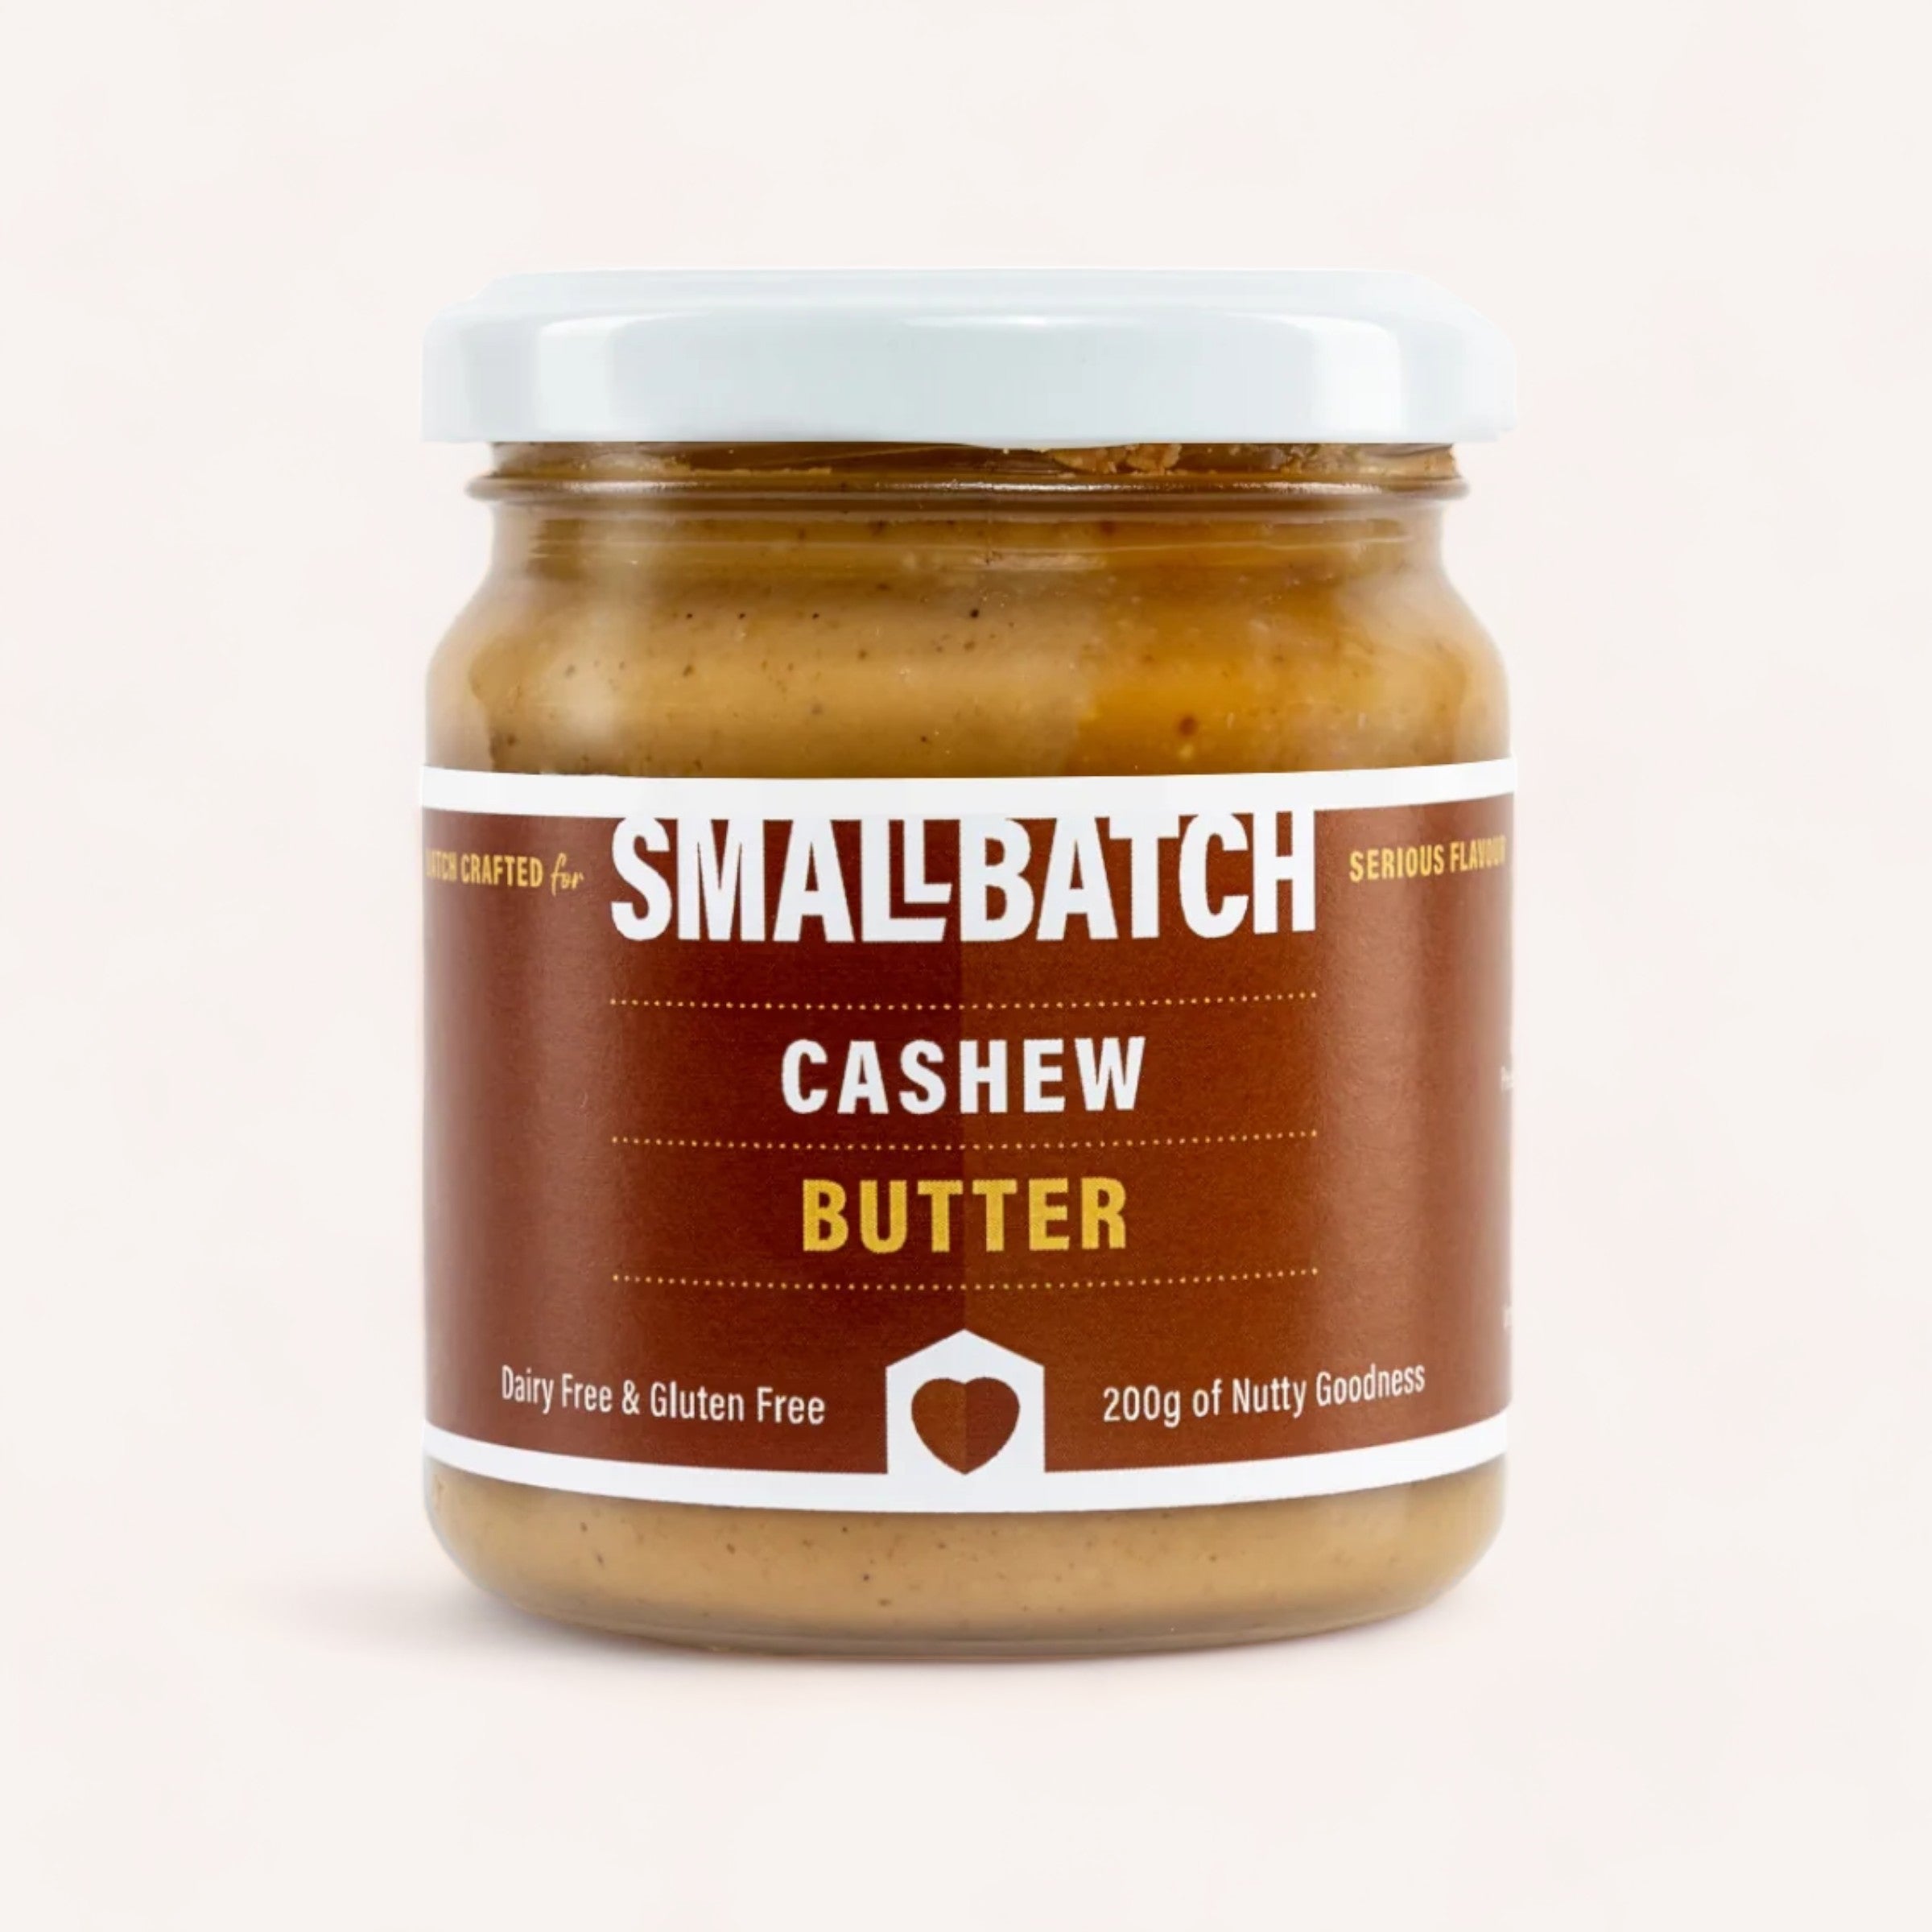 A jar of Smallbatch Cashew Butter made in Mount Maunganui with a simple and clean label, touting "dairy free & gluten free" and "200g of nutty goodness.